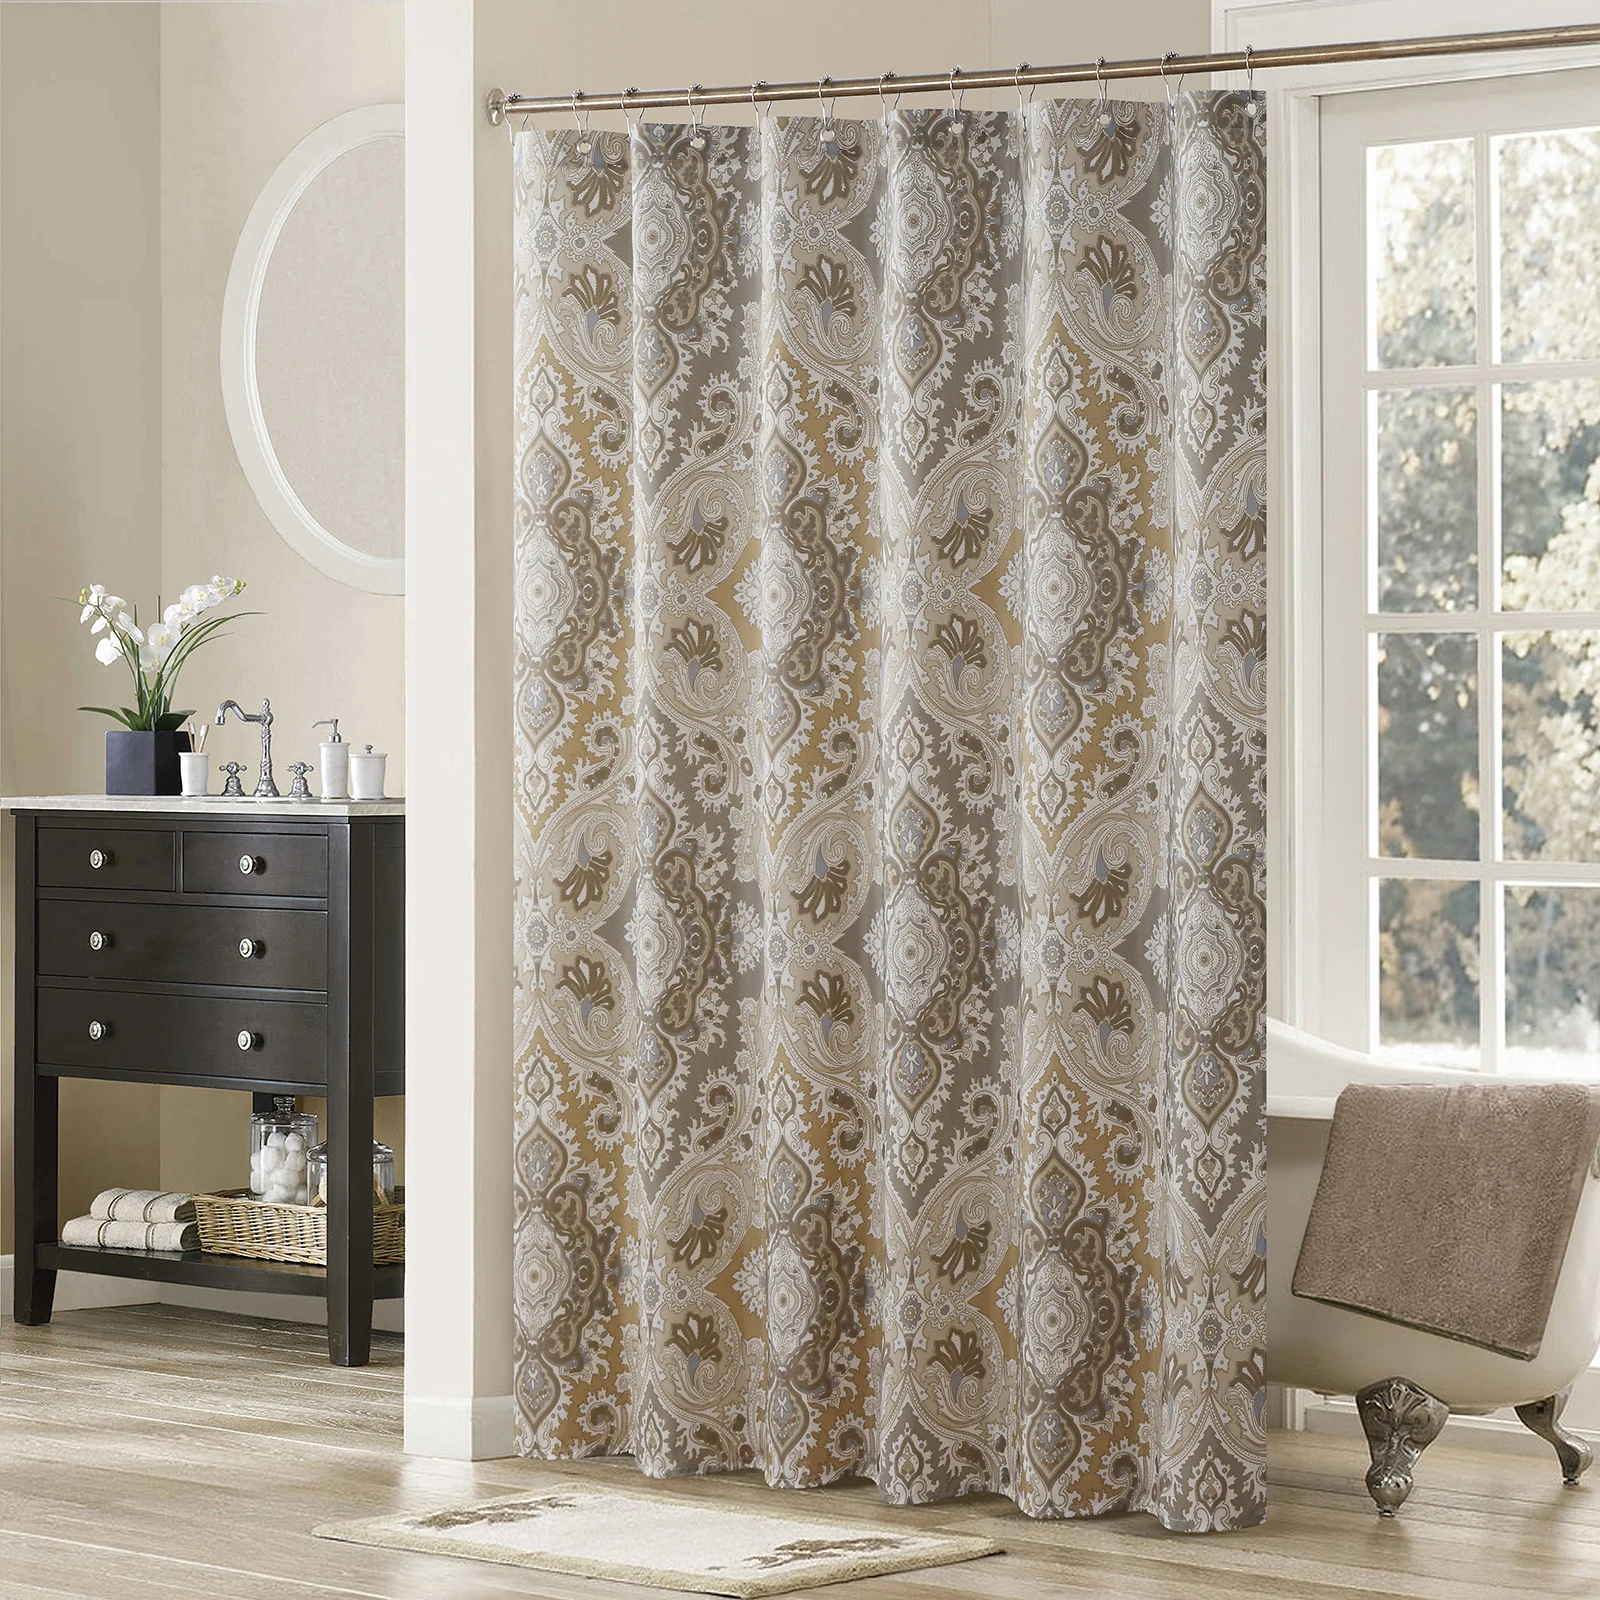 Palermo Farmhouse Khaki Classic Polyester Waterproof Fabric Paisley Vintage Printed Decorative Taupe Shower Curtain